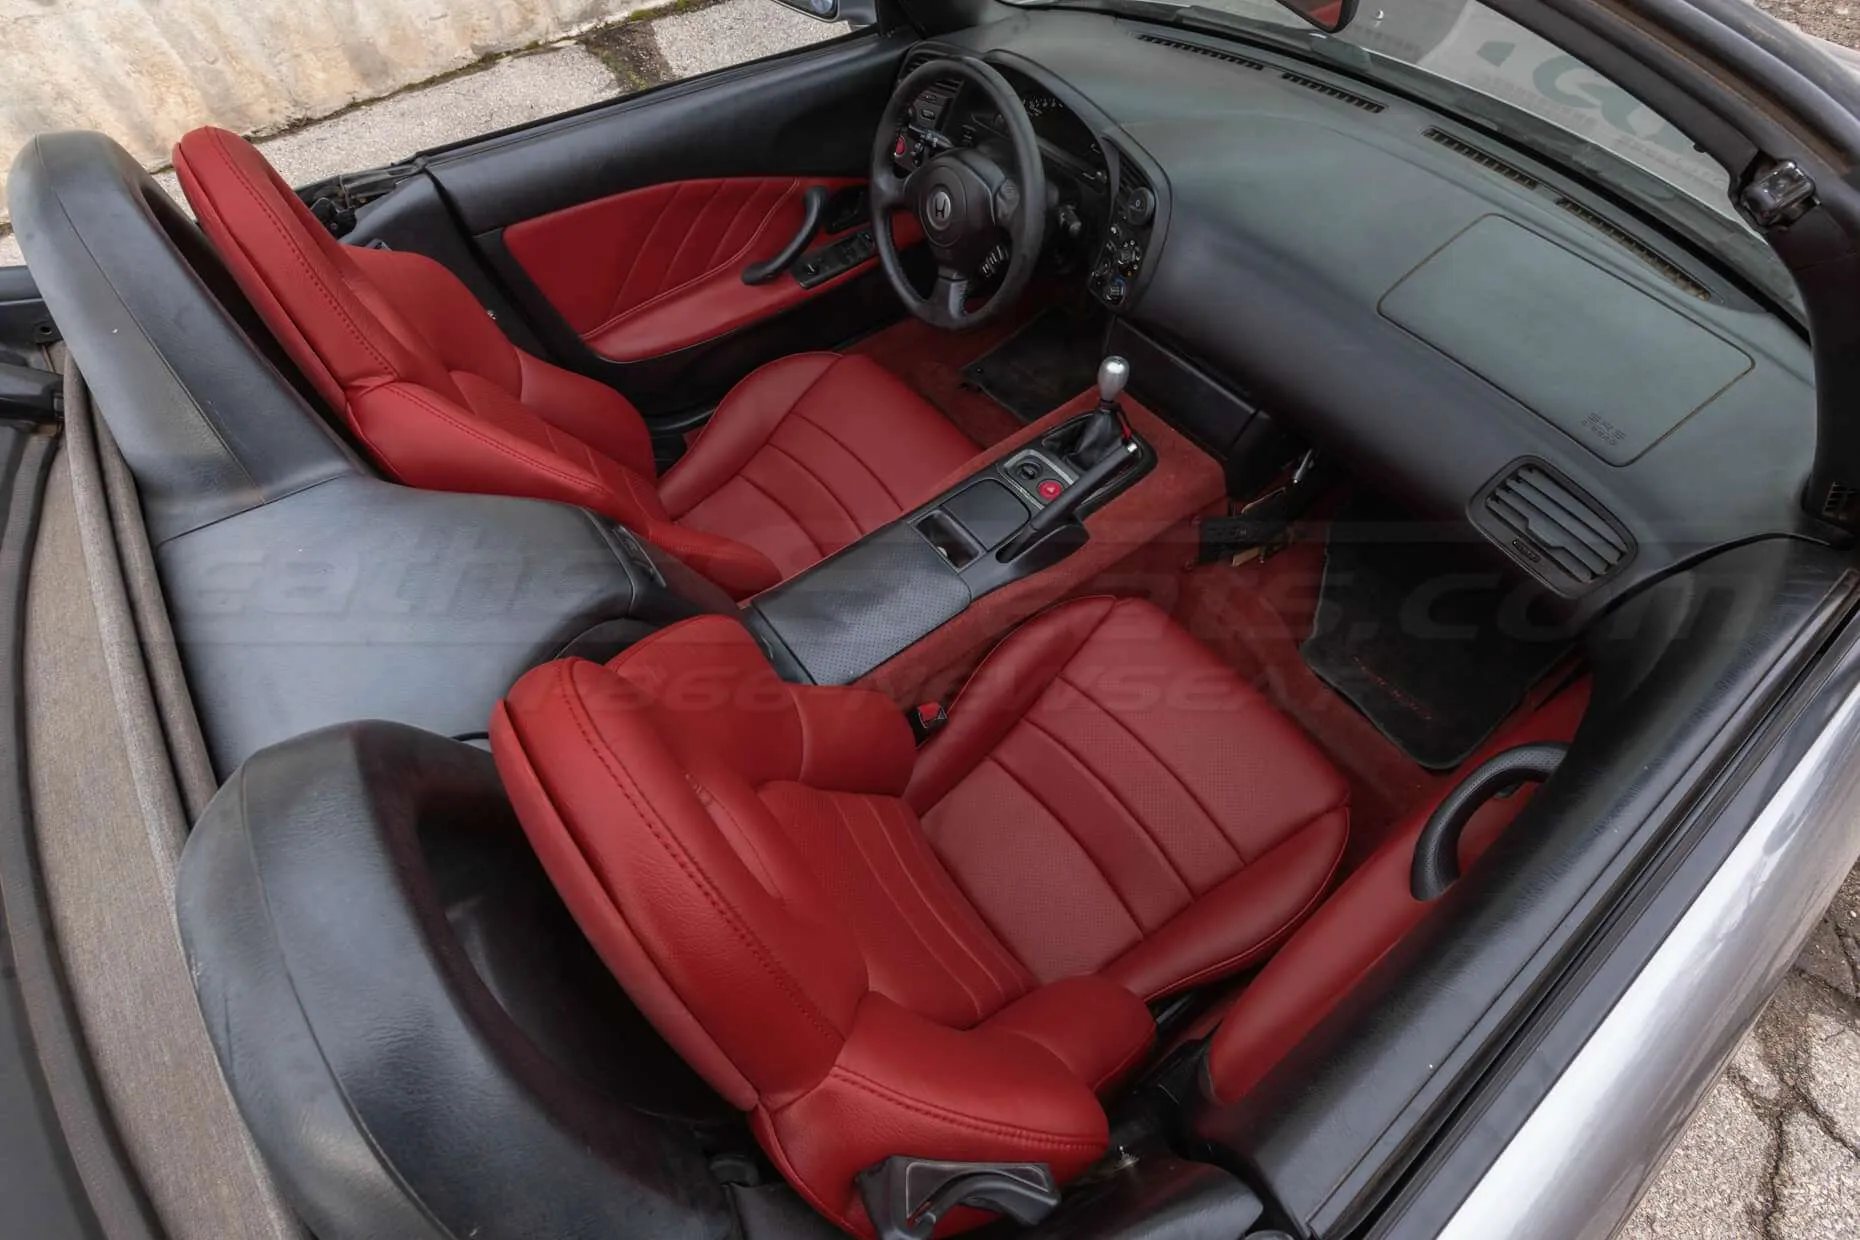 Honda S2000 Cardinal Leather Seats - Installed - Overhead view of interior